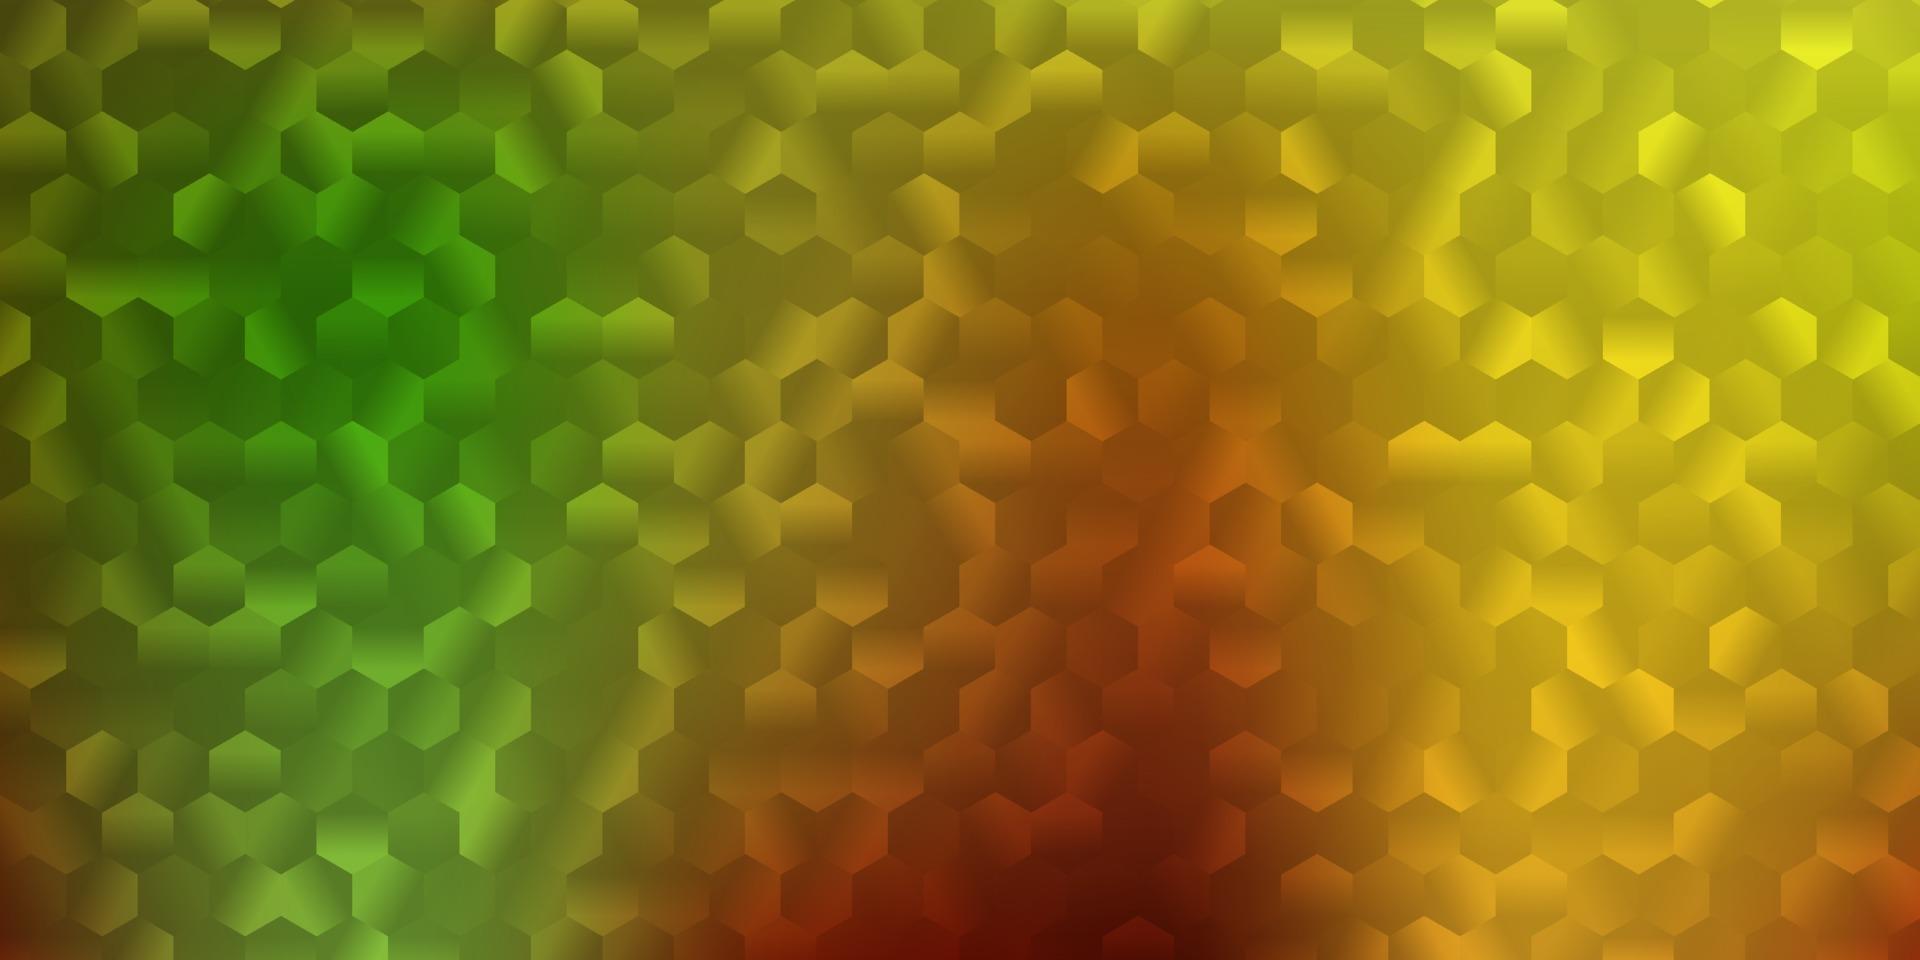 Light green, yellow vector texture with colorful hexagons.